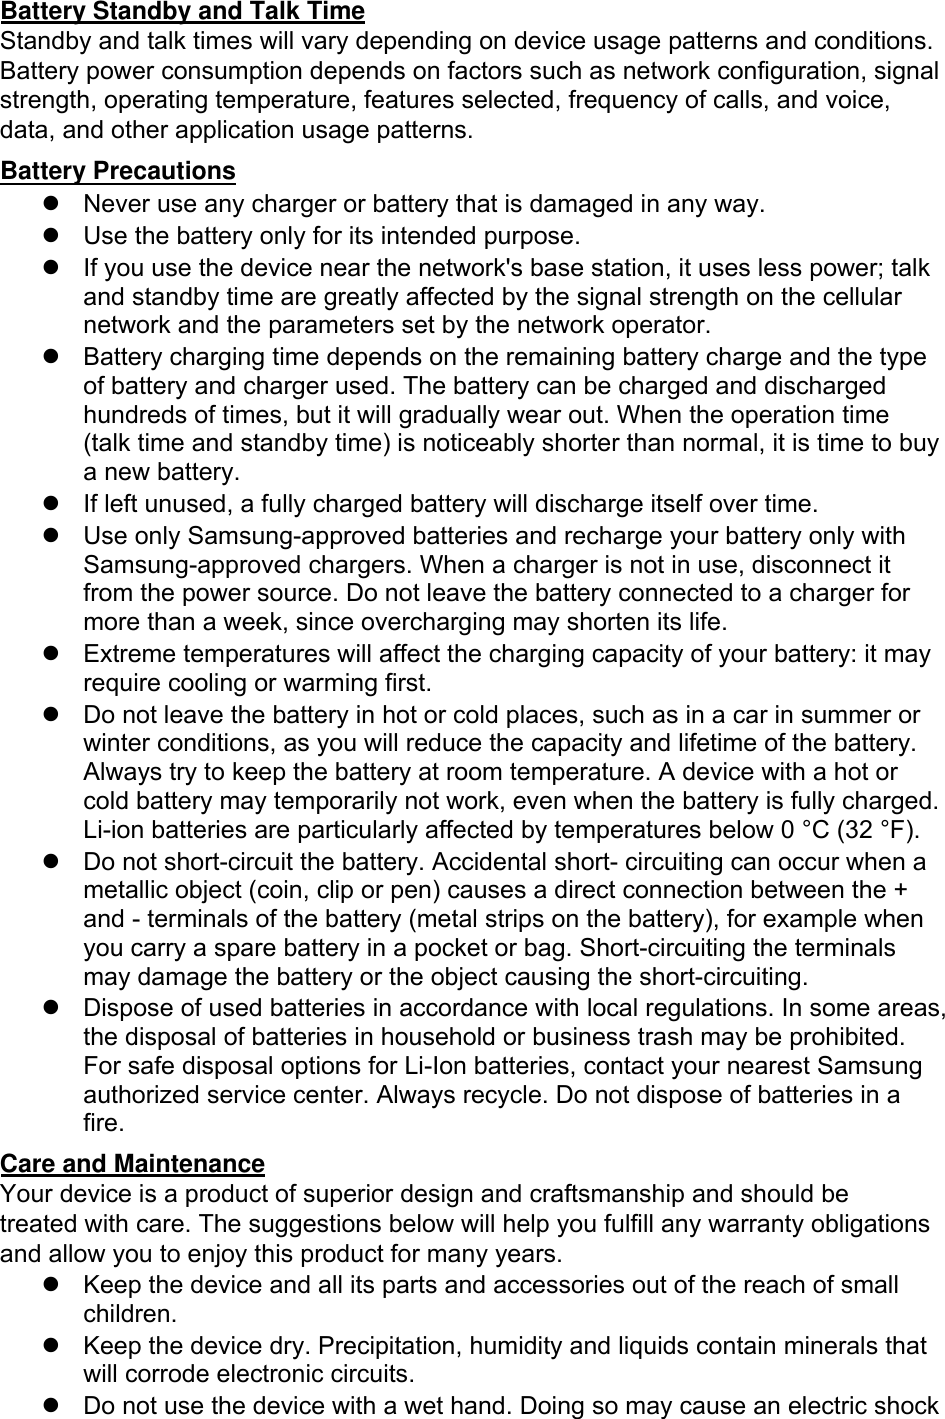 Battery Standby and Talk Time Standby and talk times will vary depending on device usage patterns and conditions. Battery power consumption depends on factors such as network configuration, signal strength, operating temperature, features selected, frequency of calls, and voice, data, and other application usage patterns.  Battery Precautions Never use any charger or battery that is damaged in any way.Use the battery only for its intended purpose.If you use the device near the network&apos;s base station, it uses less power; talk and standby time are greatly affected by the signal strength on the cellular network and the parameters set by the network operator.Battery charging time depends on the remaining battery charge and the typeof battery and charger used. The battery can be charged and dischargedhundreds of times, but it will gradually wear out. When the operation time(talk time and standby time) is noticeably shorter than normal, it is time to buya new battery.If left unused, a fully charged battery will discharge itself over time.Use only Samsung-approved batteries and recharge your battery only withSamsung-approved chargers. When a charger is not in use, disconnect itfrom the power source. Do not leave the battery connected to a charger formore than a week, since overcharging may shorten its life.Extreme temperatures will affect the charging capacity of your battery: it mayrequire cooling or warming first.Do not leave the battery in hot or cold places, such as in a car in summer or winter conditions, as you will reduce the capacity and lifetime of the battery. Always try to keep the battery at room temperature. A device with a hot or cold battery may temporarily not work, even when the battery is fully charged. Li-ion batteries are particularly affected by temperatures below 0 °C (32 °F).Do not short-circuit the battery. Accidental short- circuiting can occur when ametallic object (coin, clip or pen) causes a direct connection between the +and - terminals of the battery (metal strips on the battery), for example whenyou carry a spare battery in a pocket or bag. Short-circuiting the terminalsmay damage the battery or the object causing the short-circuiting.Dispose of used batteries in accordance with local regulations. In some areas,the disposal of batteries in household or business trash may be prohibited.For safe disposal options for Li-Ion batteries, contact your nearest Samsungauthorized service center. Always recycle. Do not dispose of batteries in afire.Care and Maintenance Your device is a product of superior design and craftsmanship and should be treated with care. The suggestions below will help you fulfill any warranty obligations and allow you to enjoy this product for many years. Keep the device and all its parts and accessories out of the reach of small children.Keep the device dry. Precipitation, humidity and liquids contain minerals that will corrode electronic circuits.Do not use the device with a wet hand. Doing so may cause an electric shock